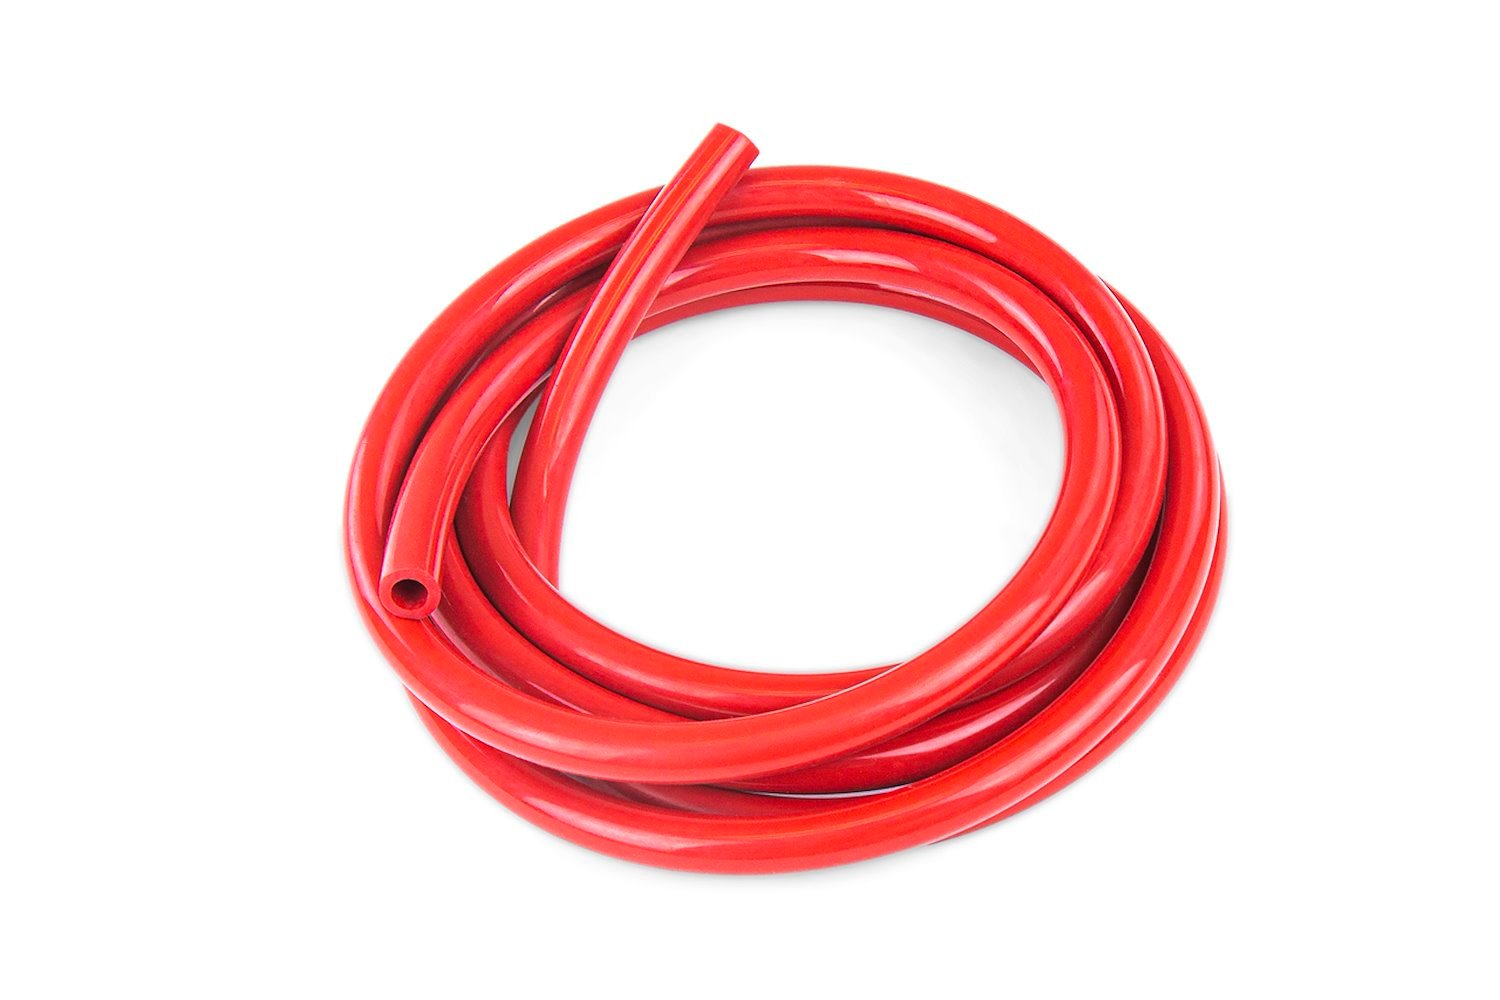 HTSVH4-REDx10 High-Temperature Silicone Vacuum Hose Tubing, 5/32 in. ID, 10 ft. Roll, Red